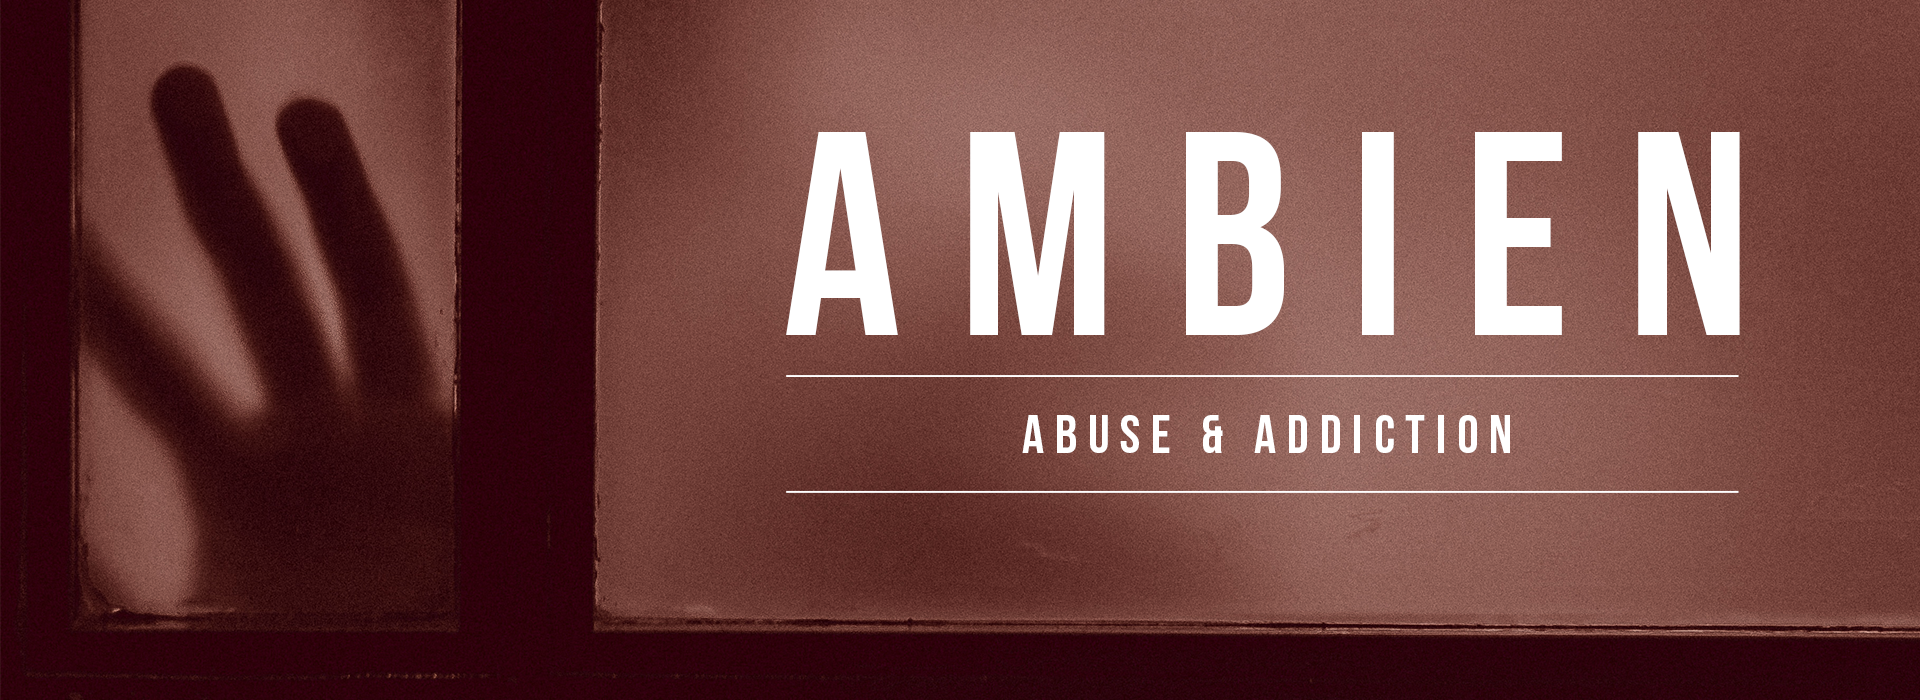 Ambien abuse and addiction